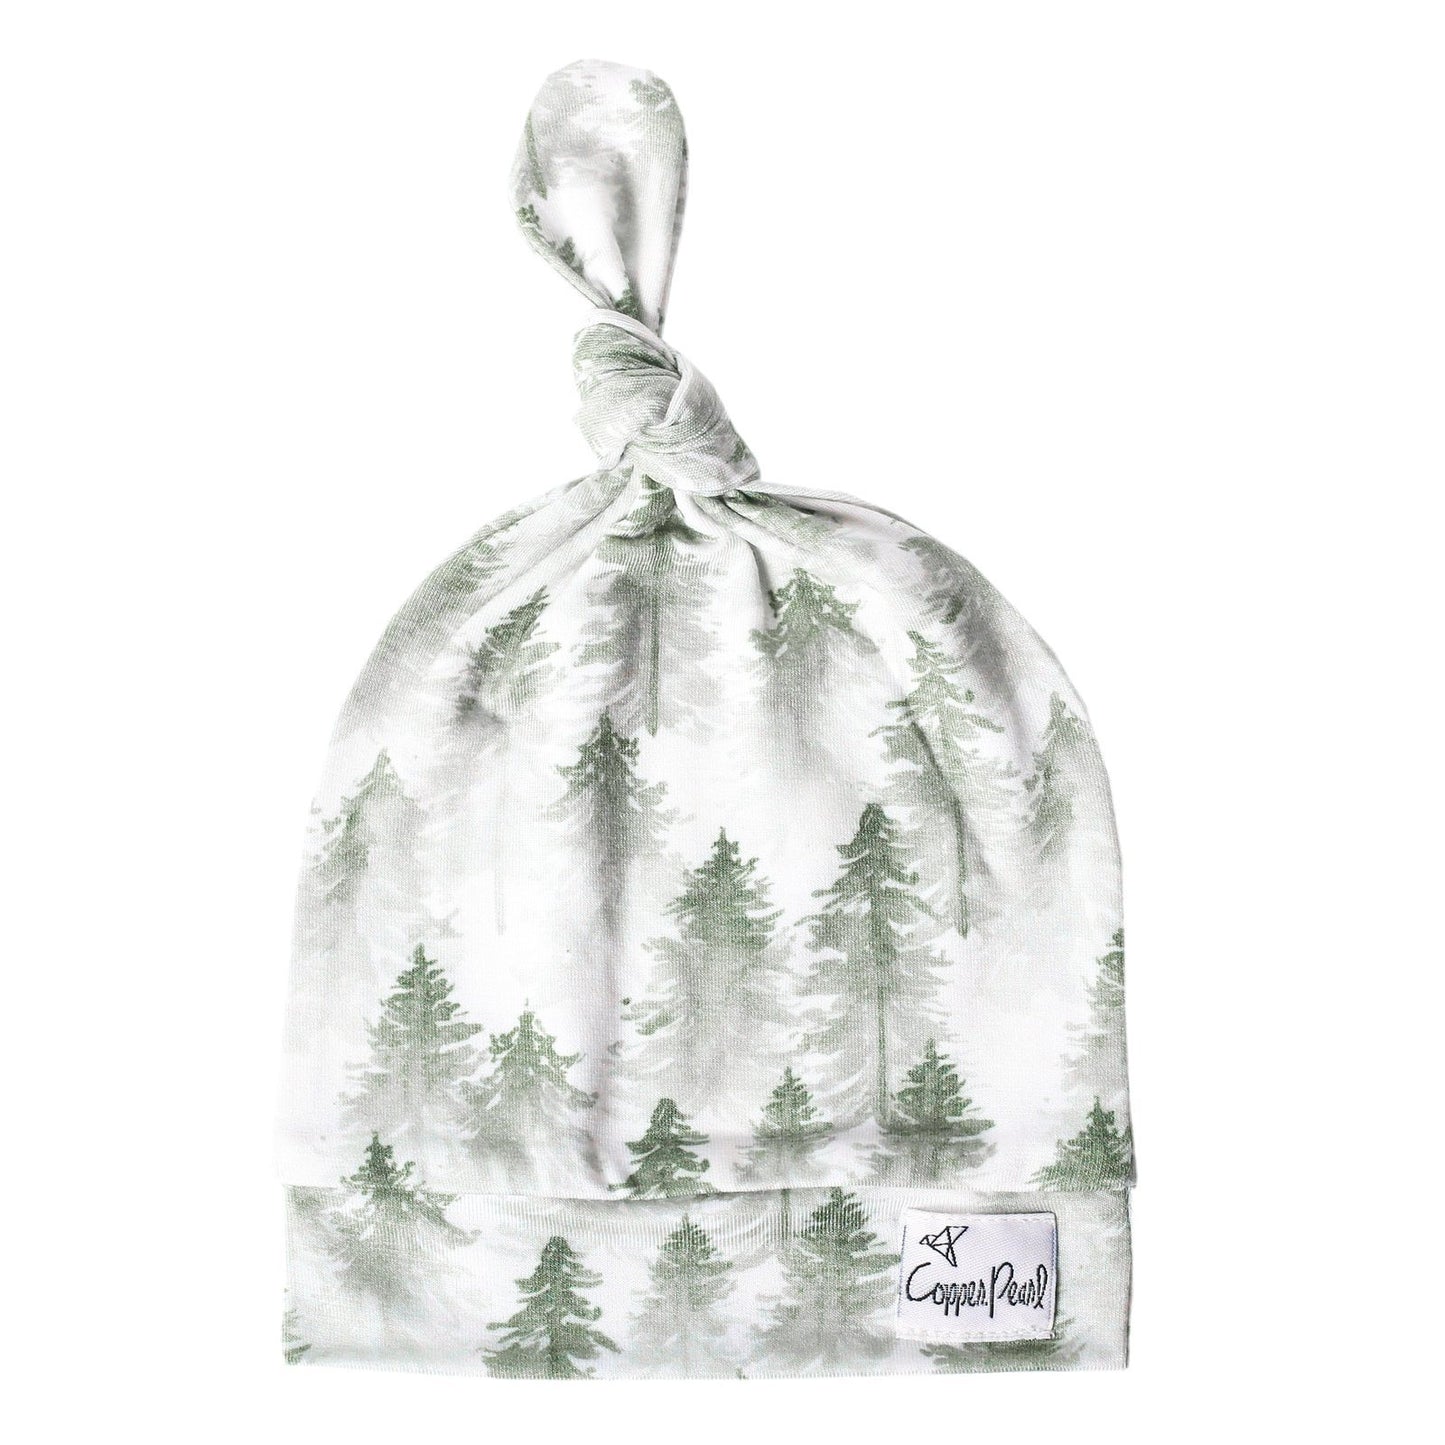 Top Knot Hats Hats Copper Pearl Evergreen (Watercolor Trees) 